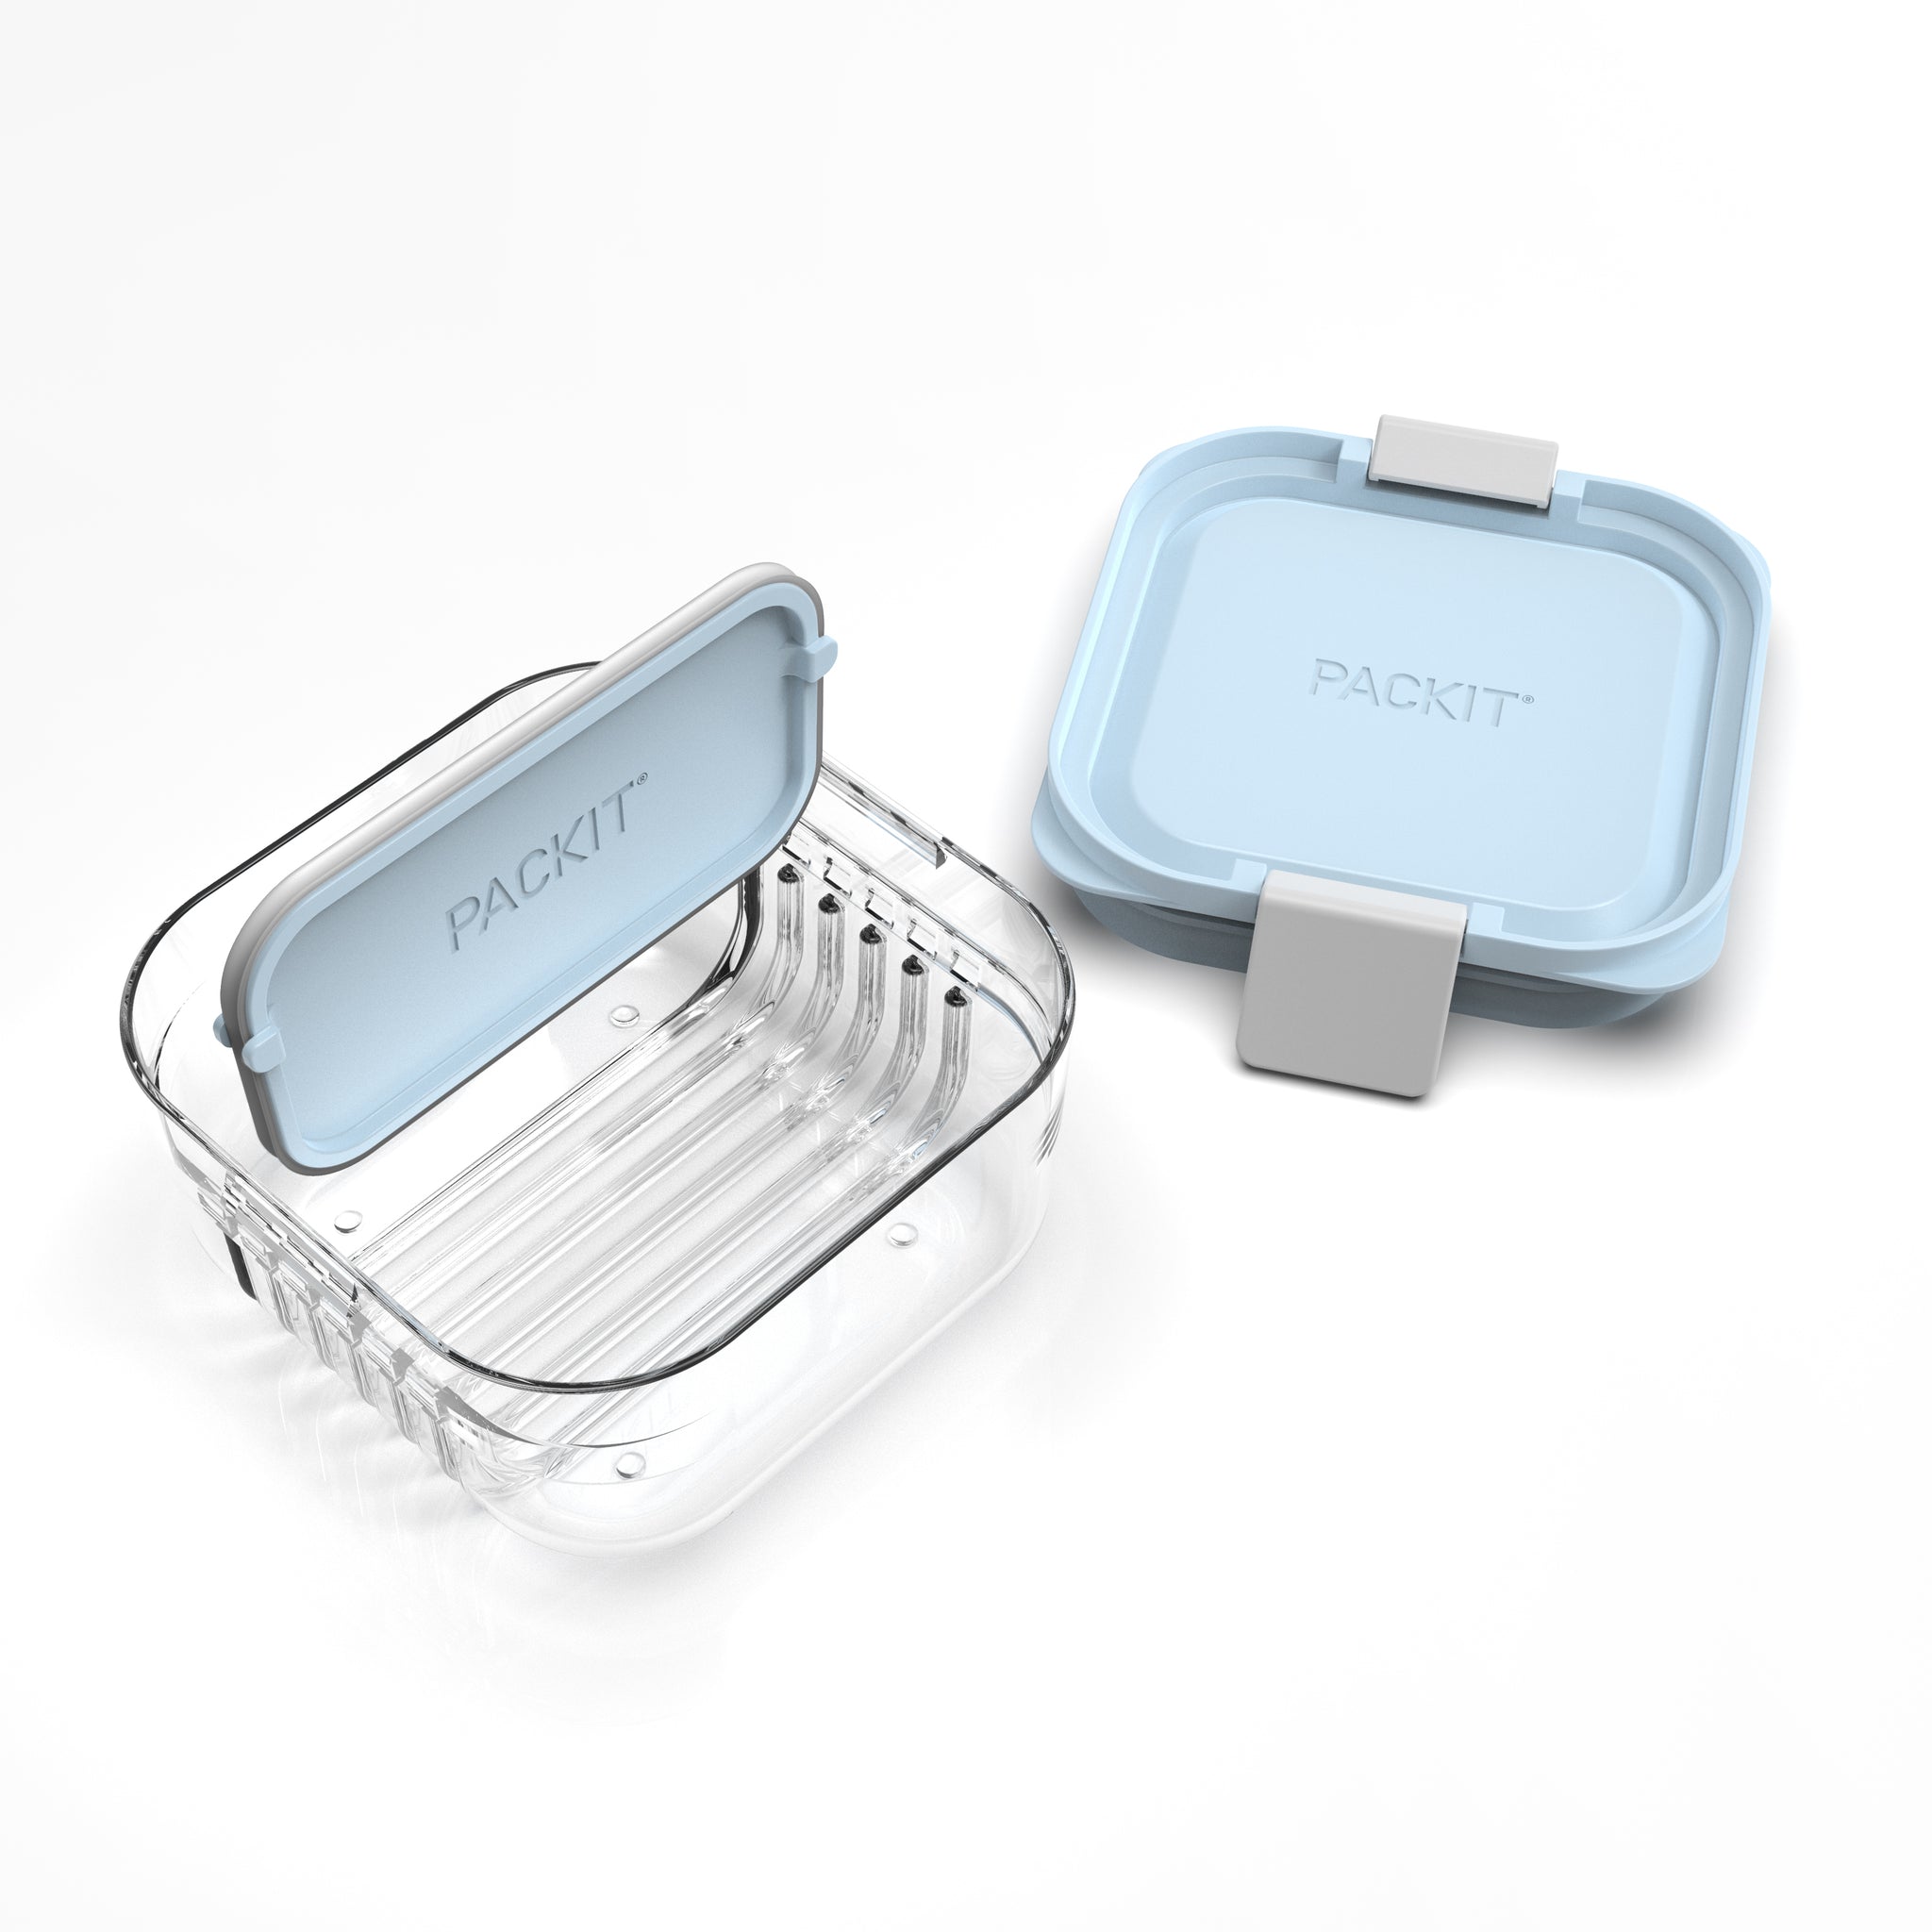 PackIt - Mod Bento Snack Container (4 Colors)